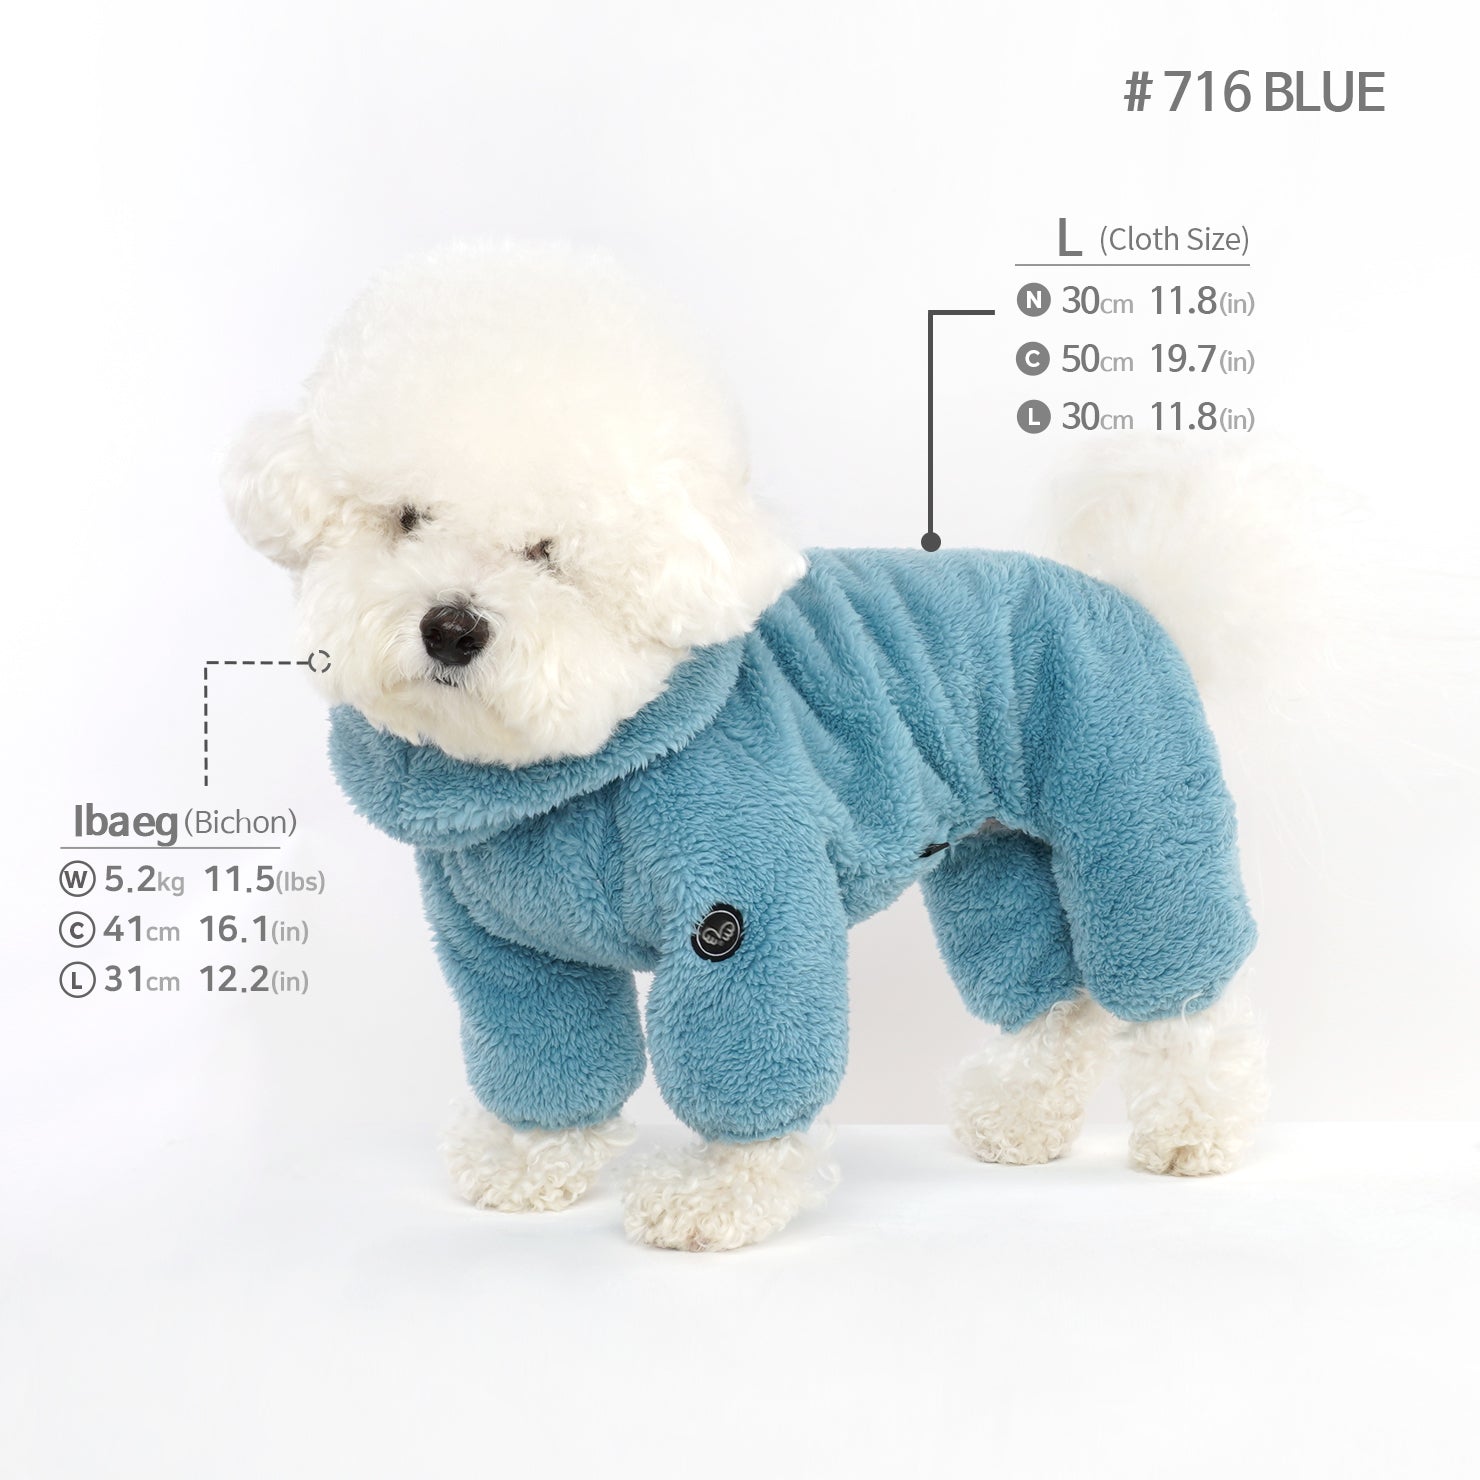 [PA-OR164] PUPPYANGEL DUMBLE BOA (BJ RONG) Coverall ( For Unisex, 2XL ~ 7XL)